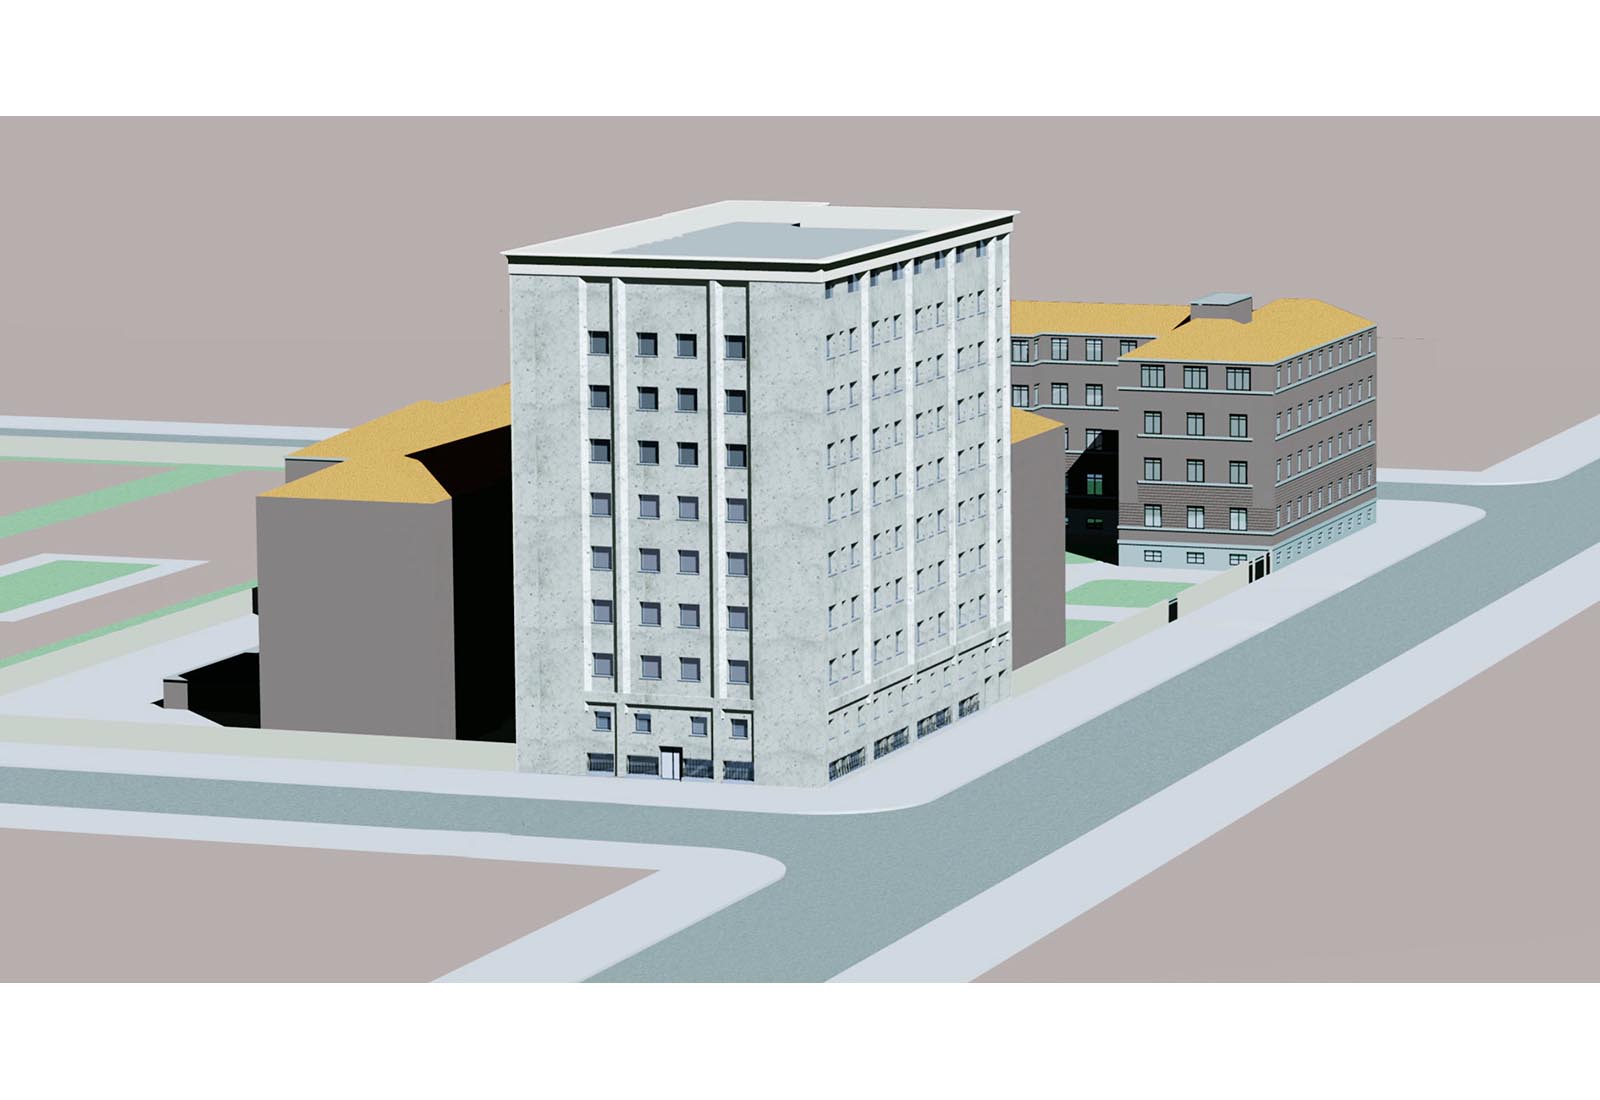 Besta hospital in Milan - 1st phase - Perspective